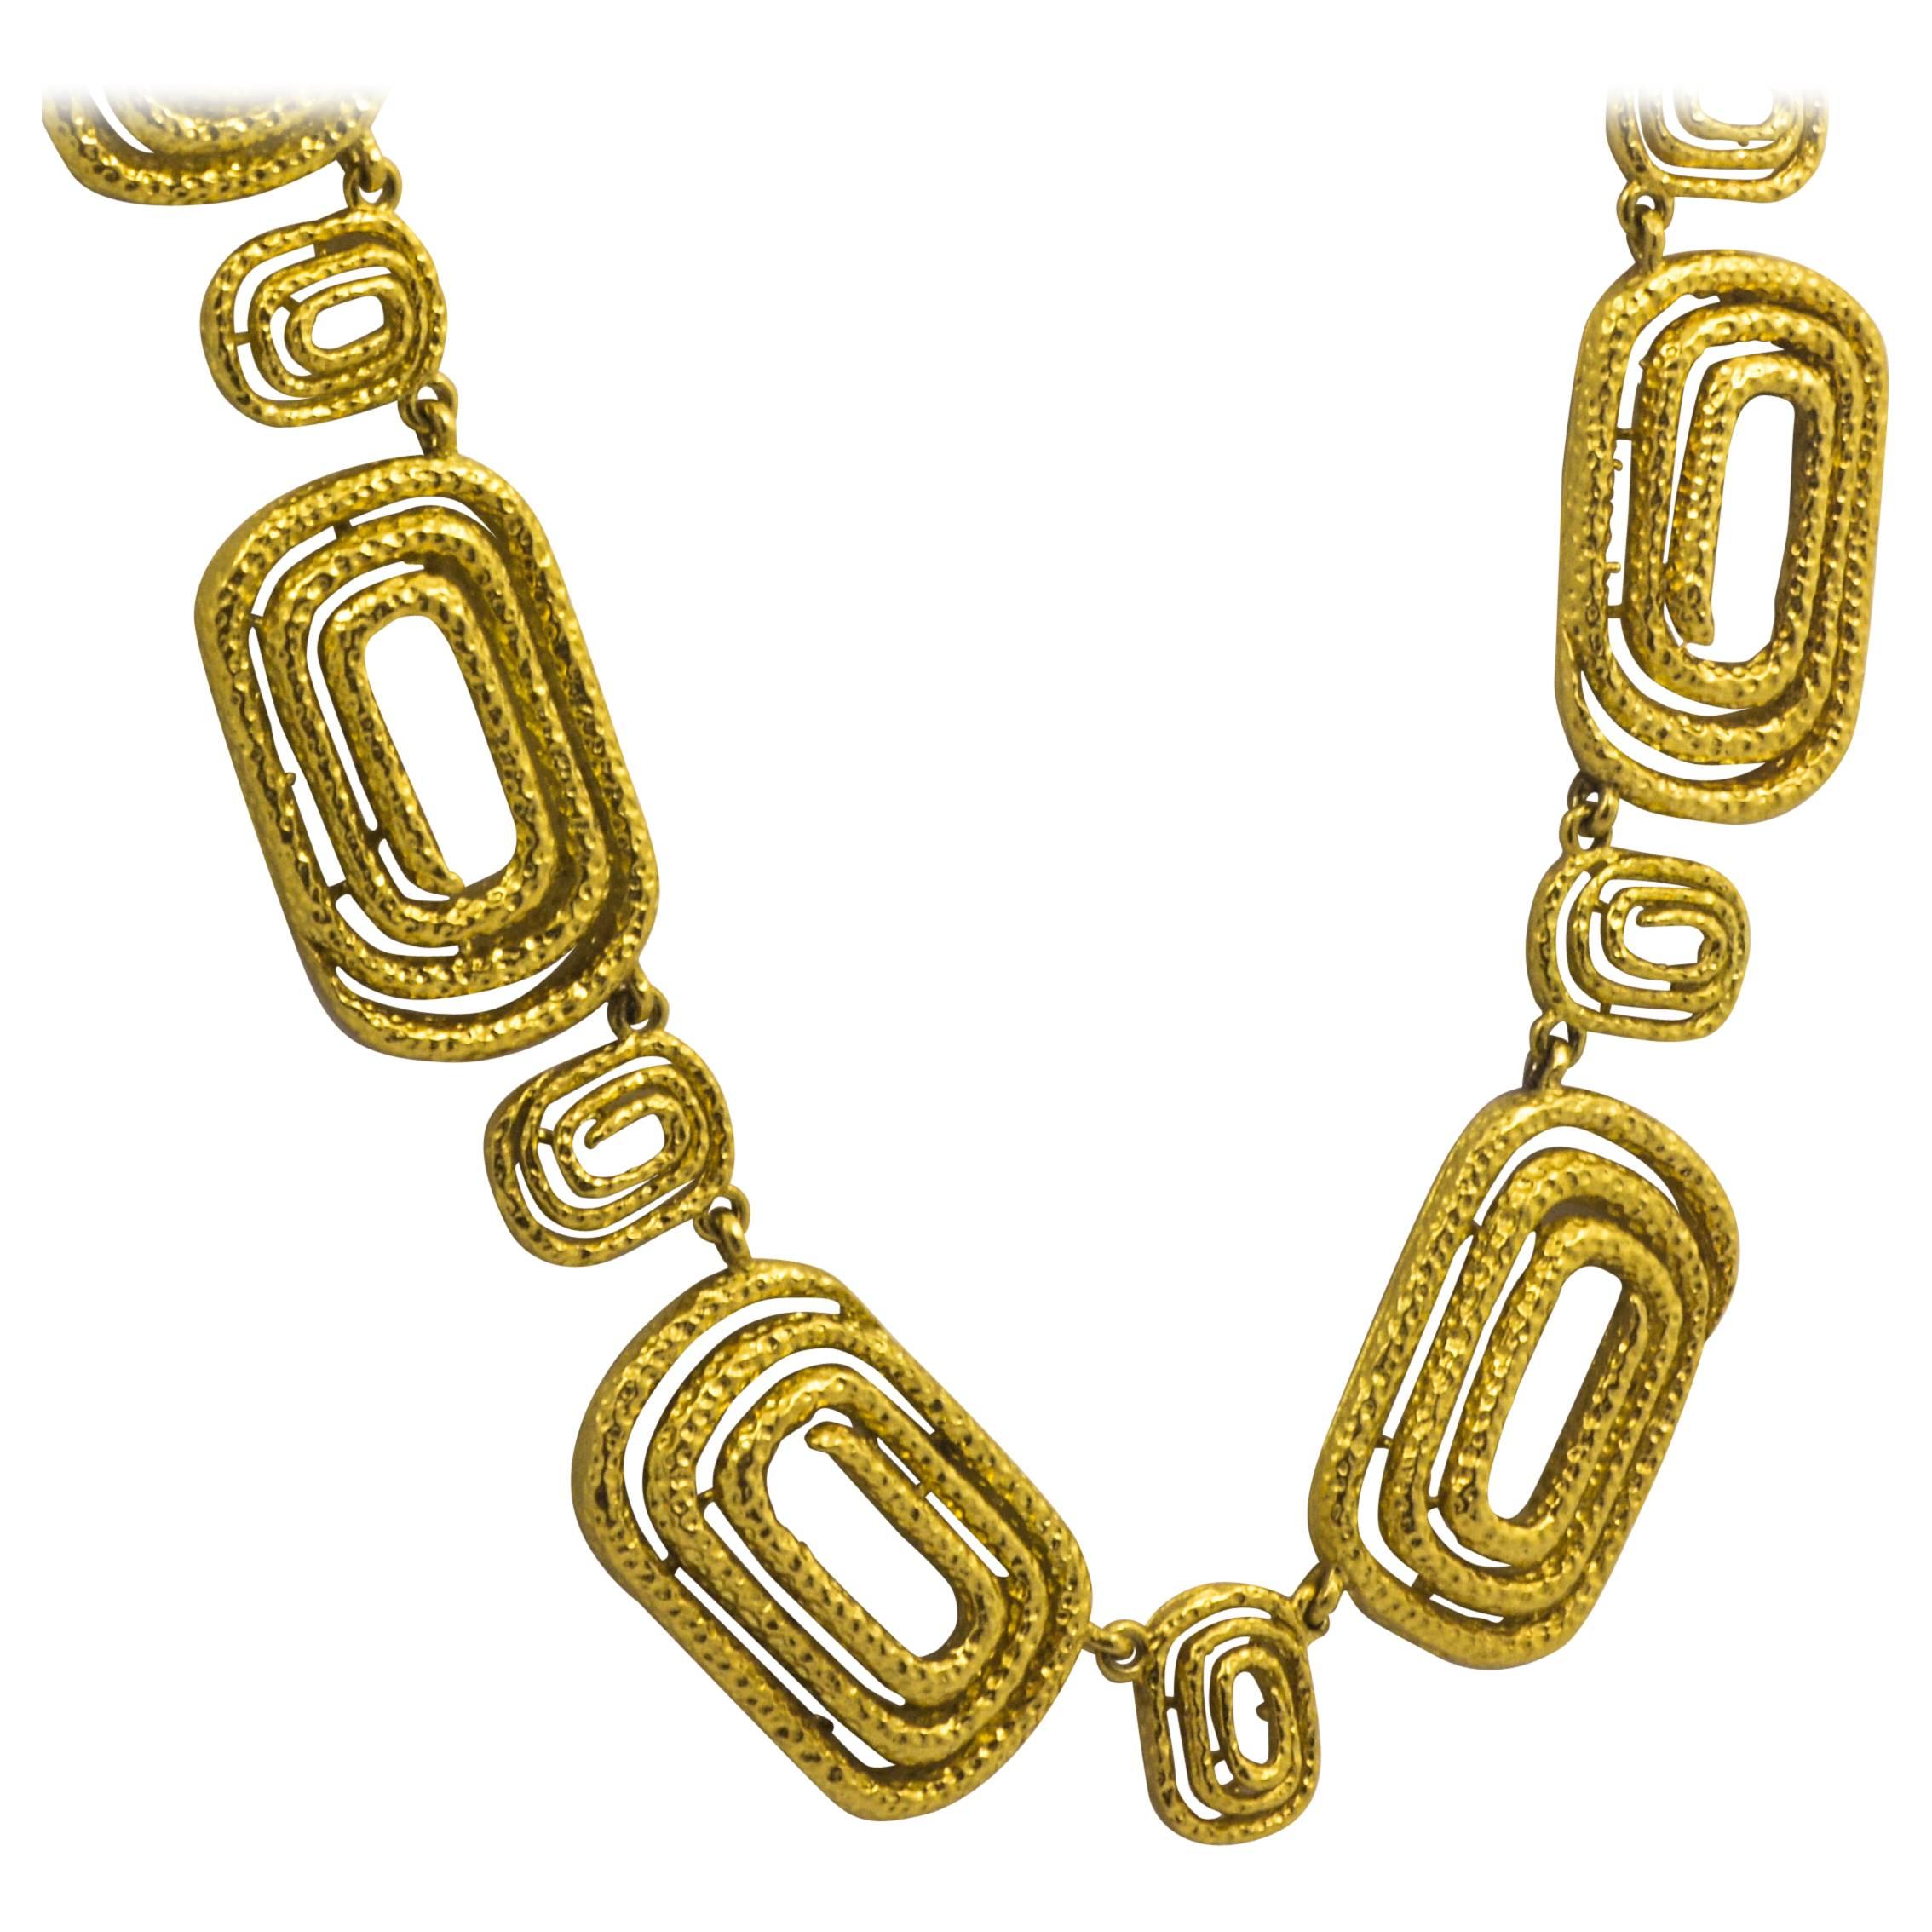 Architectural Engraved Gold Necklace